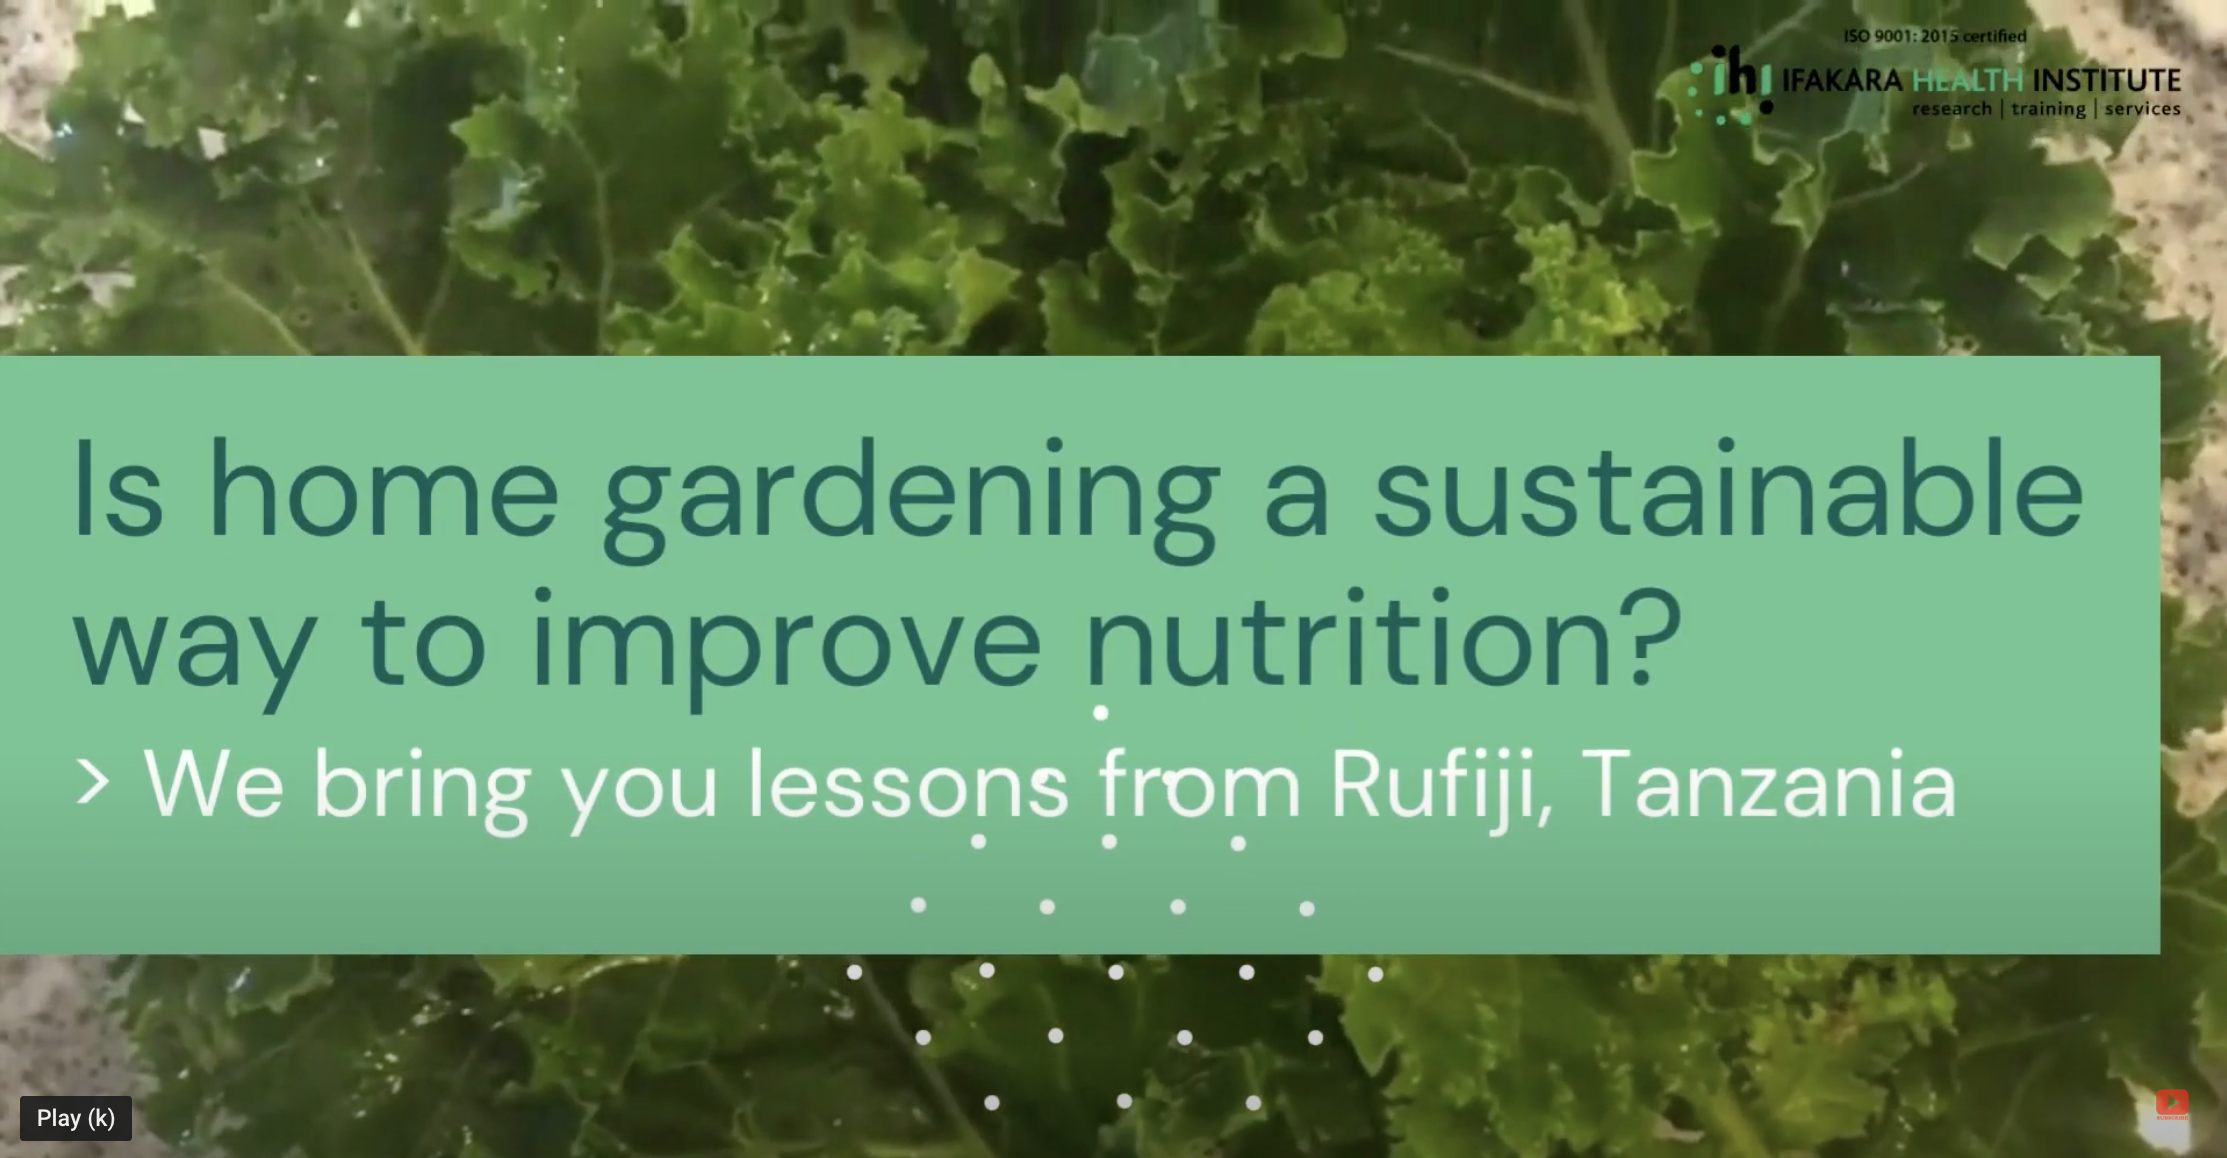 Is home gardening a sustainable way to improve nutrition?